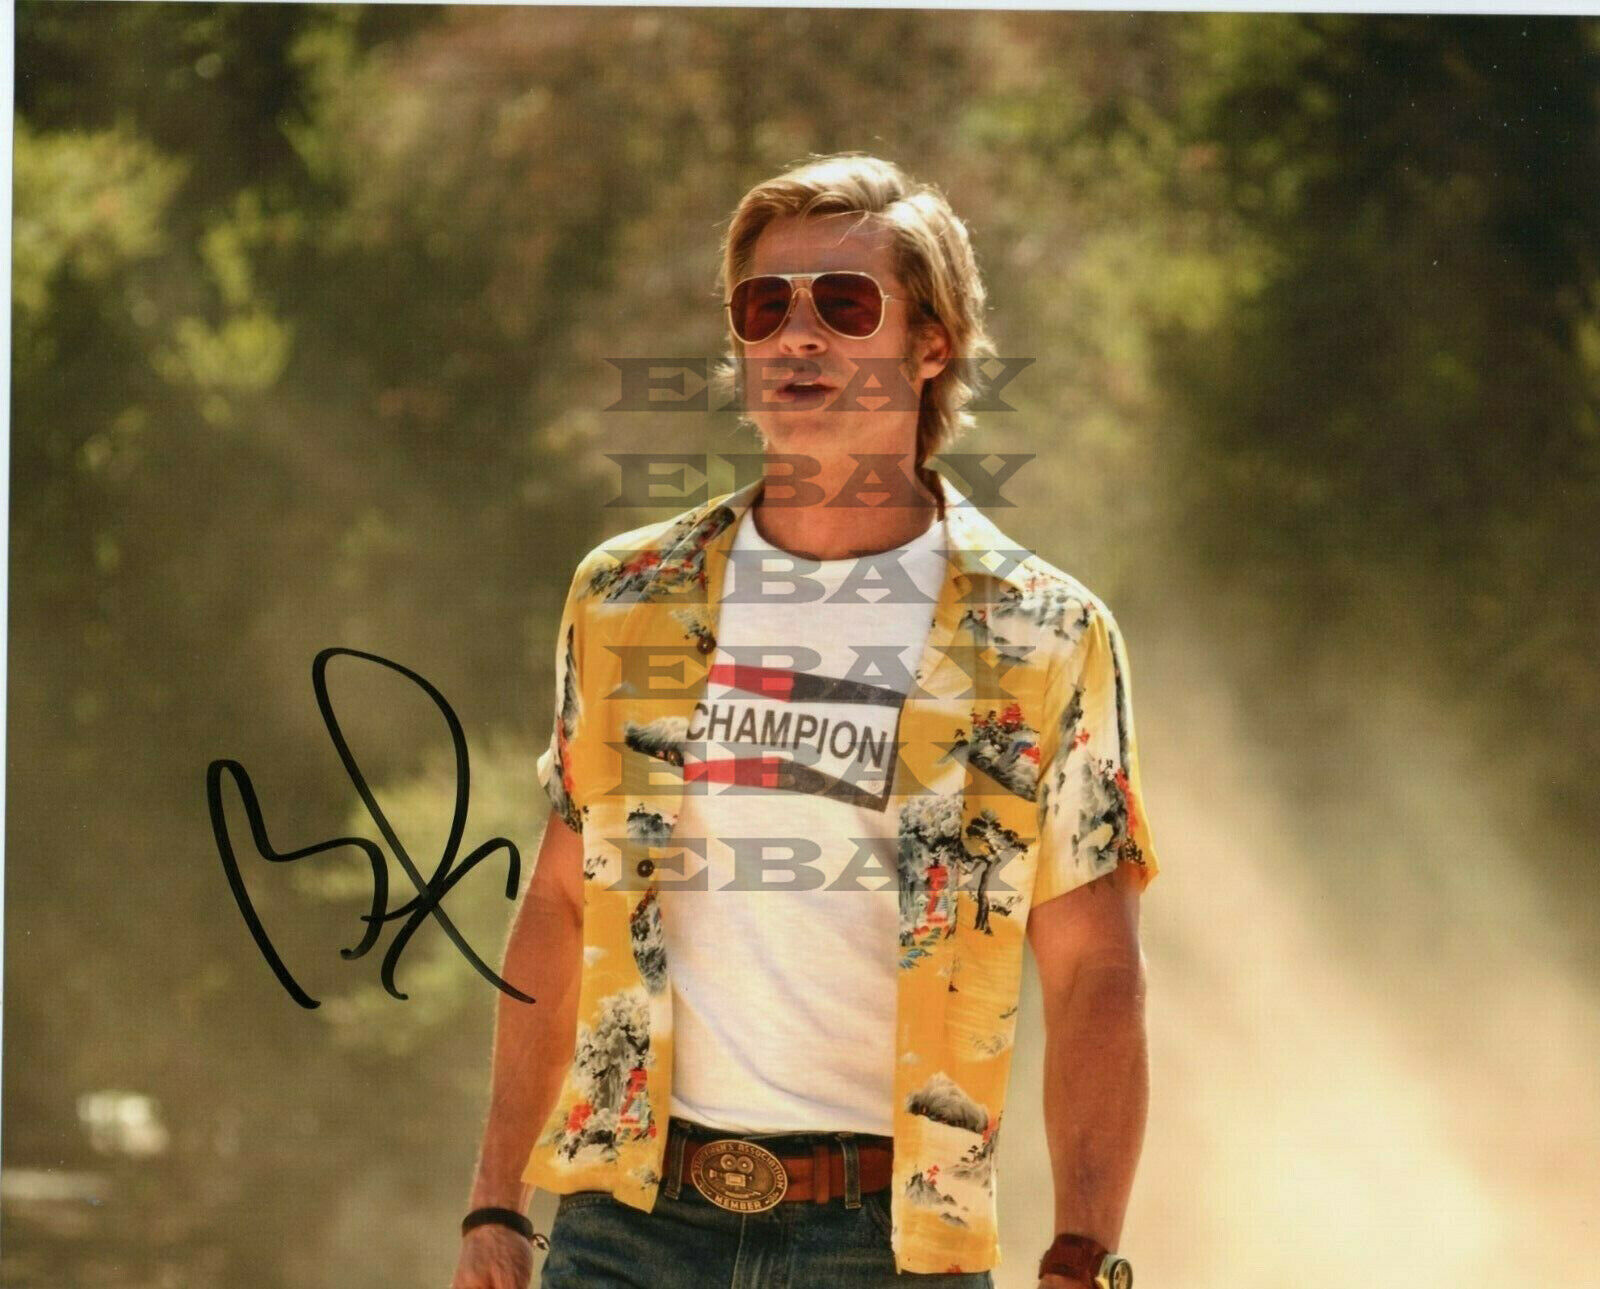 Brad Pitt Autographed Signed 8x10 Photo Poster painting Reprint